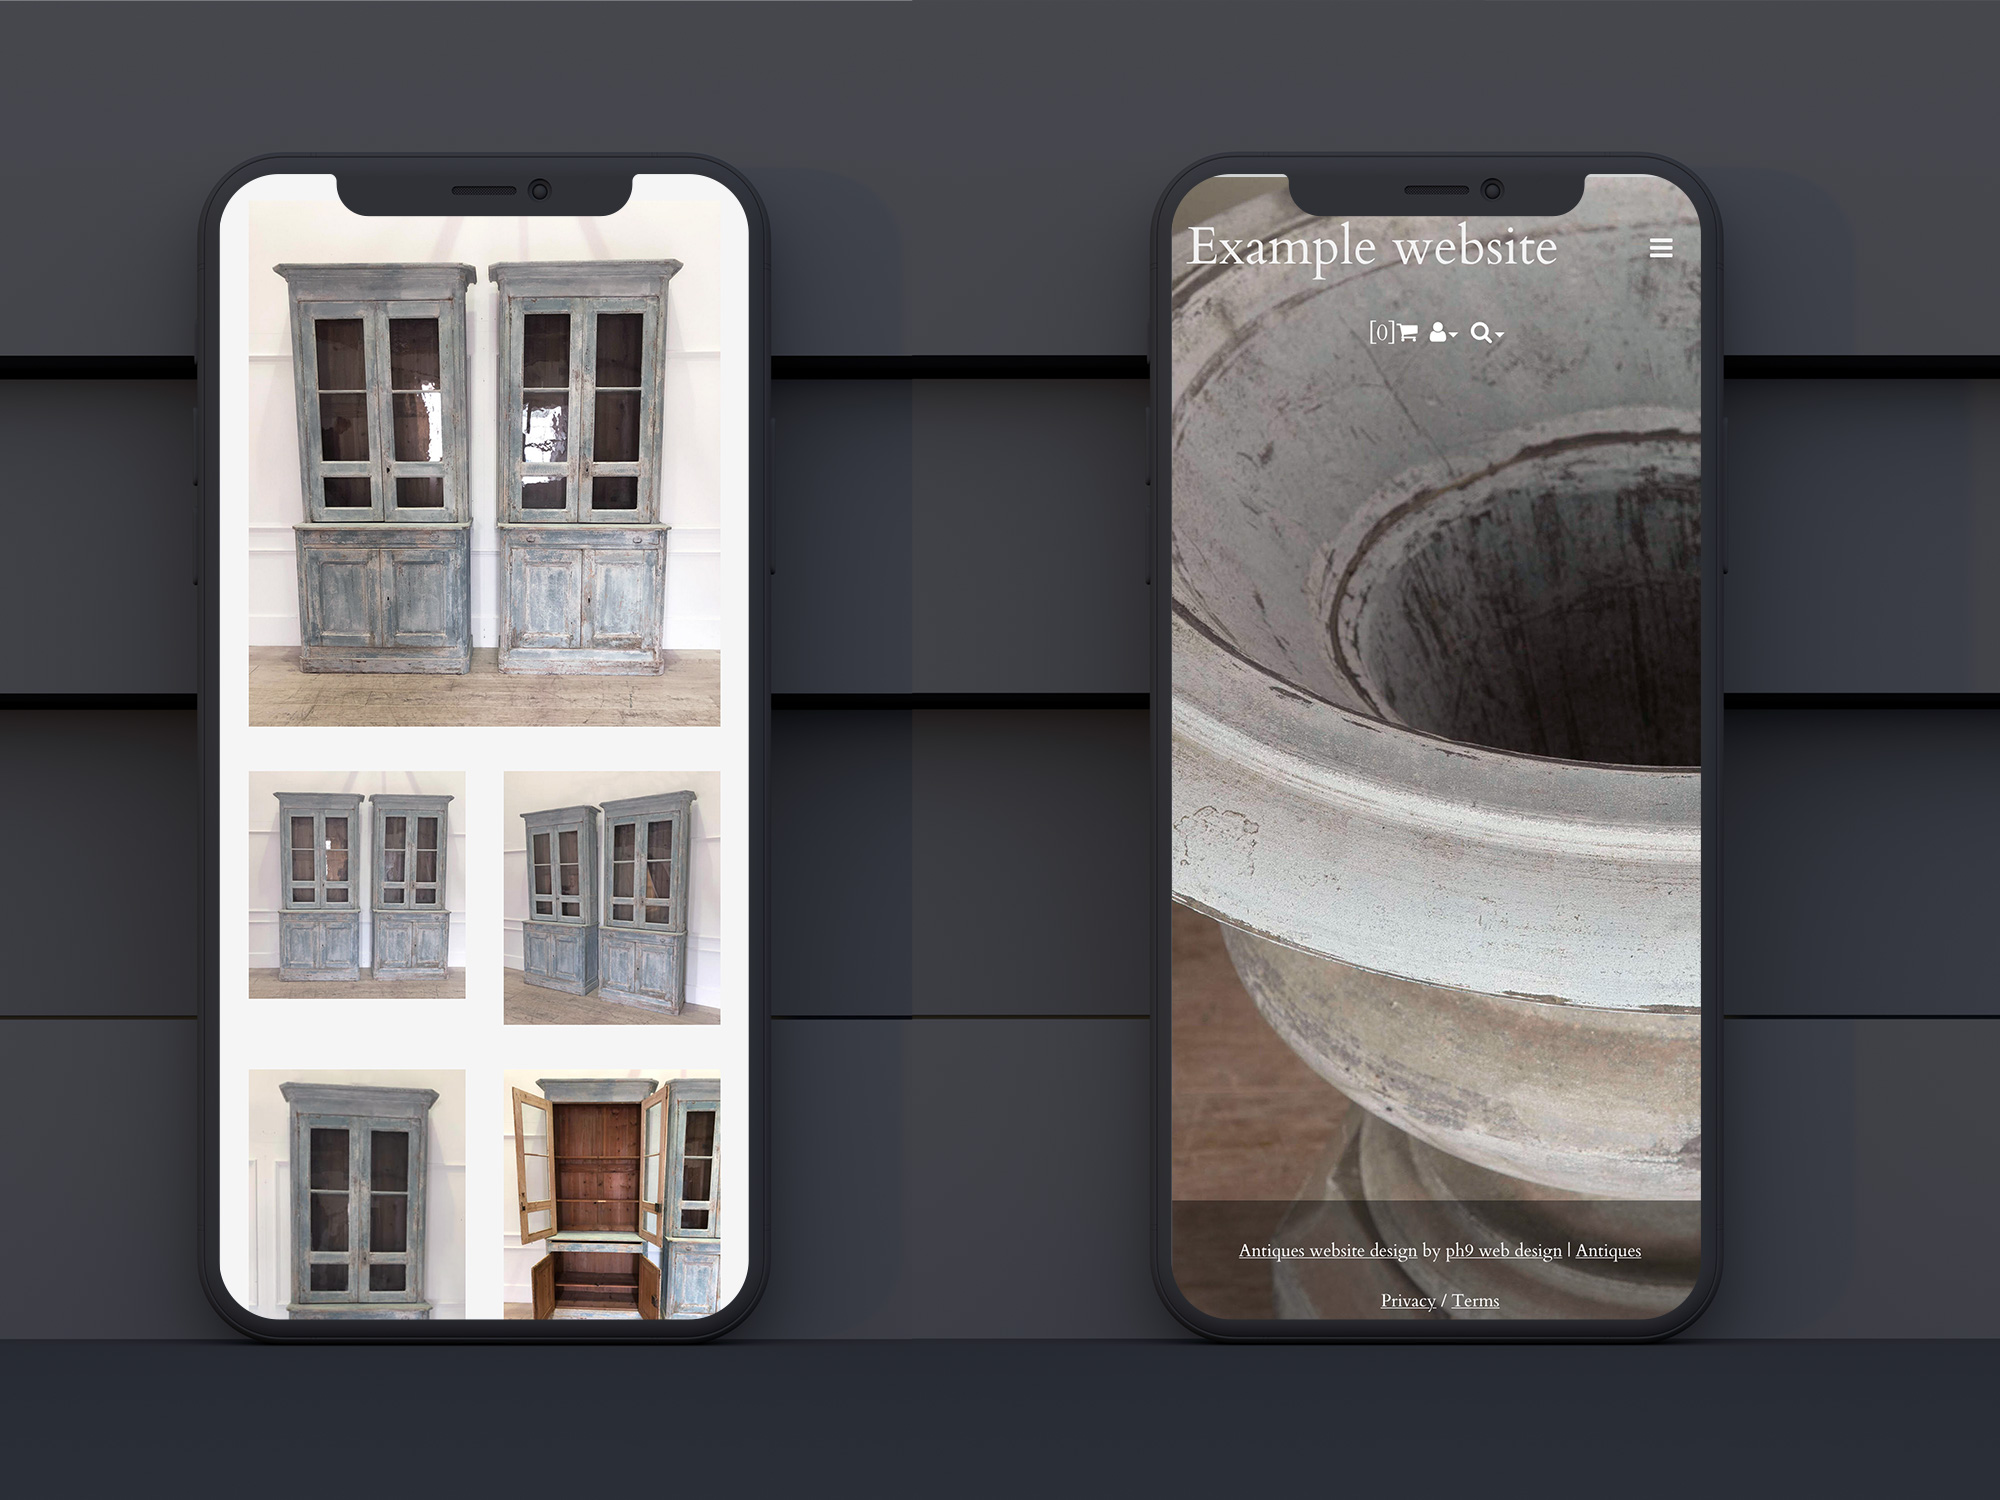 New design theme on two iPhones